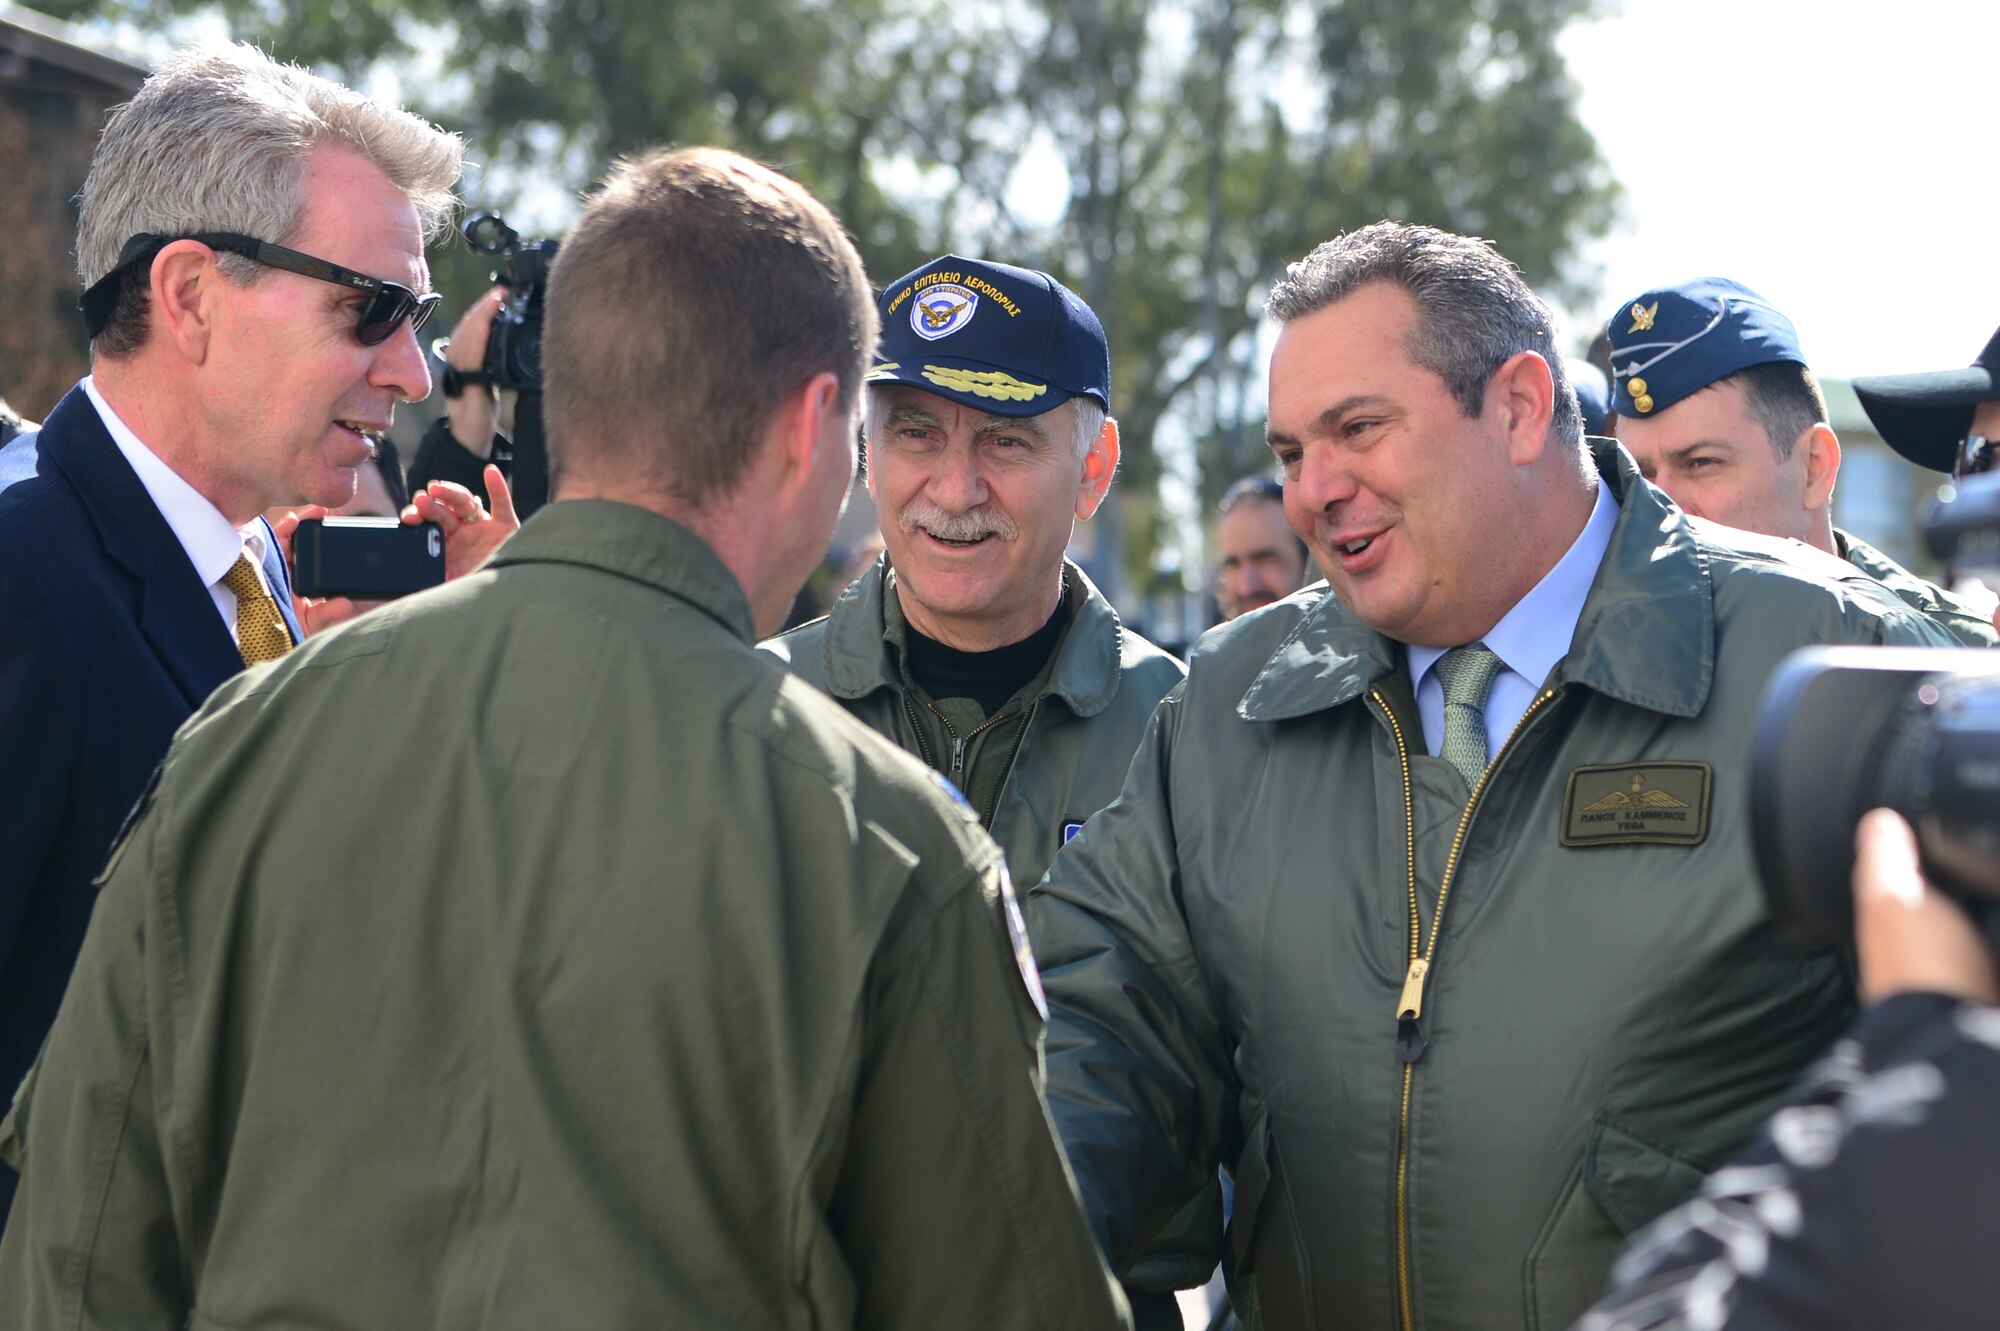 Lt. Col. Jeremy Renken, 492nd Fighter Squadron commander, shakes hands with Greek Minister of Defence Panos Kammenos during an INIOHOS 18 media event at Andravida Air Base, Greece, March 20, 2018. INIOHOS 18 is a Hellenic Air Force-led, large force flying exercise focused on strengthening partnerships and interoperability.
(U.S. Air Force photo/1st Lt. Elias Small)